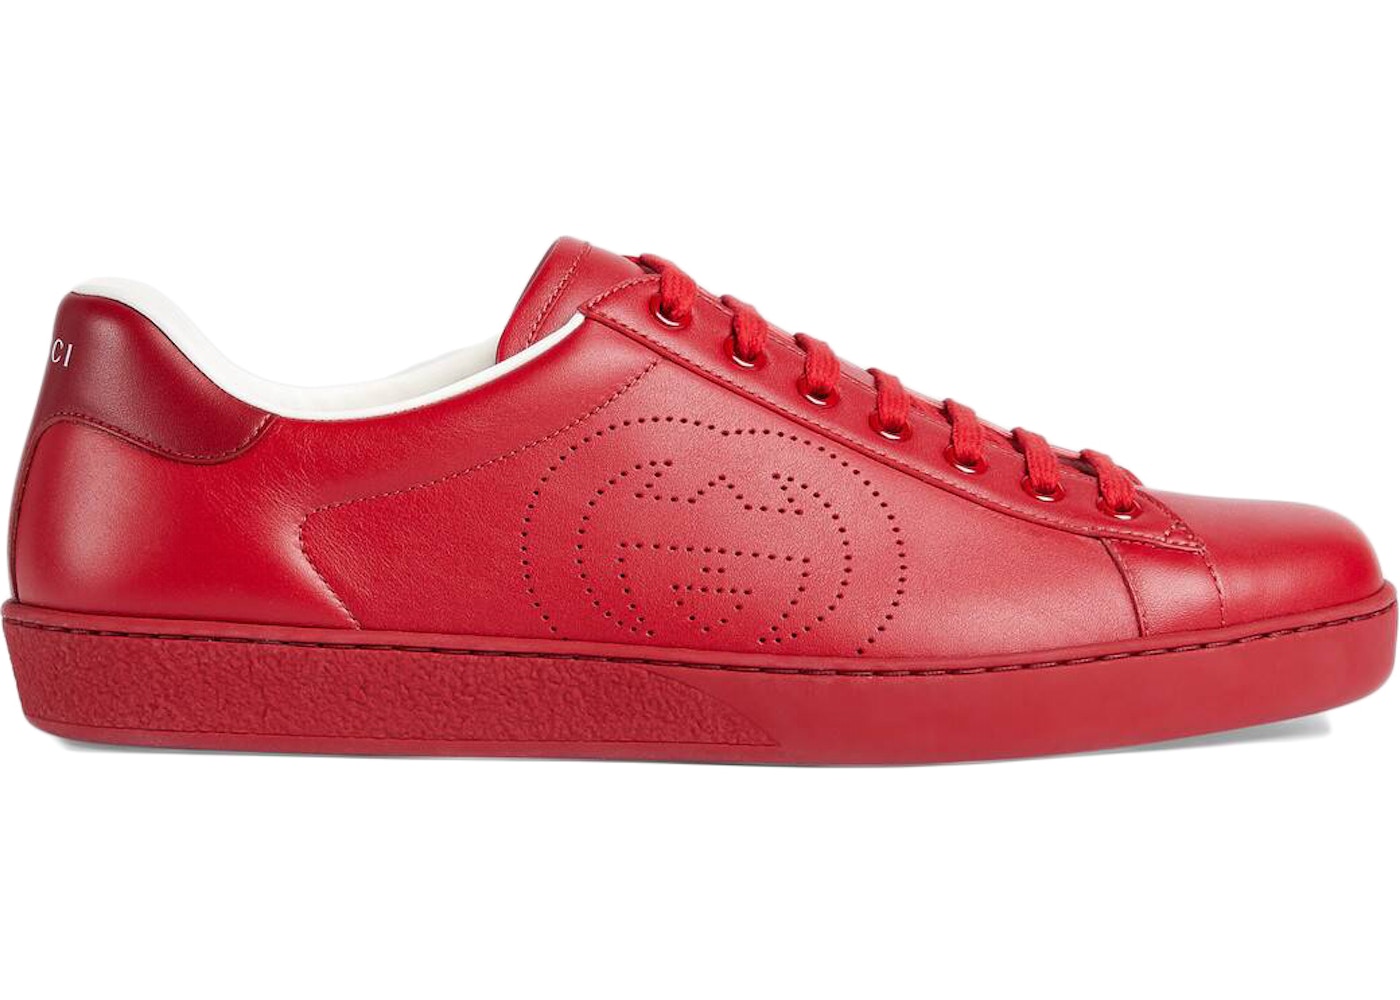 Gucci Ace Perforated Interlocking G Red - _599147 AYO70 6463